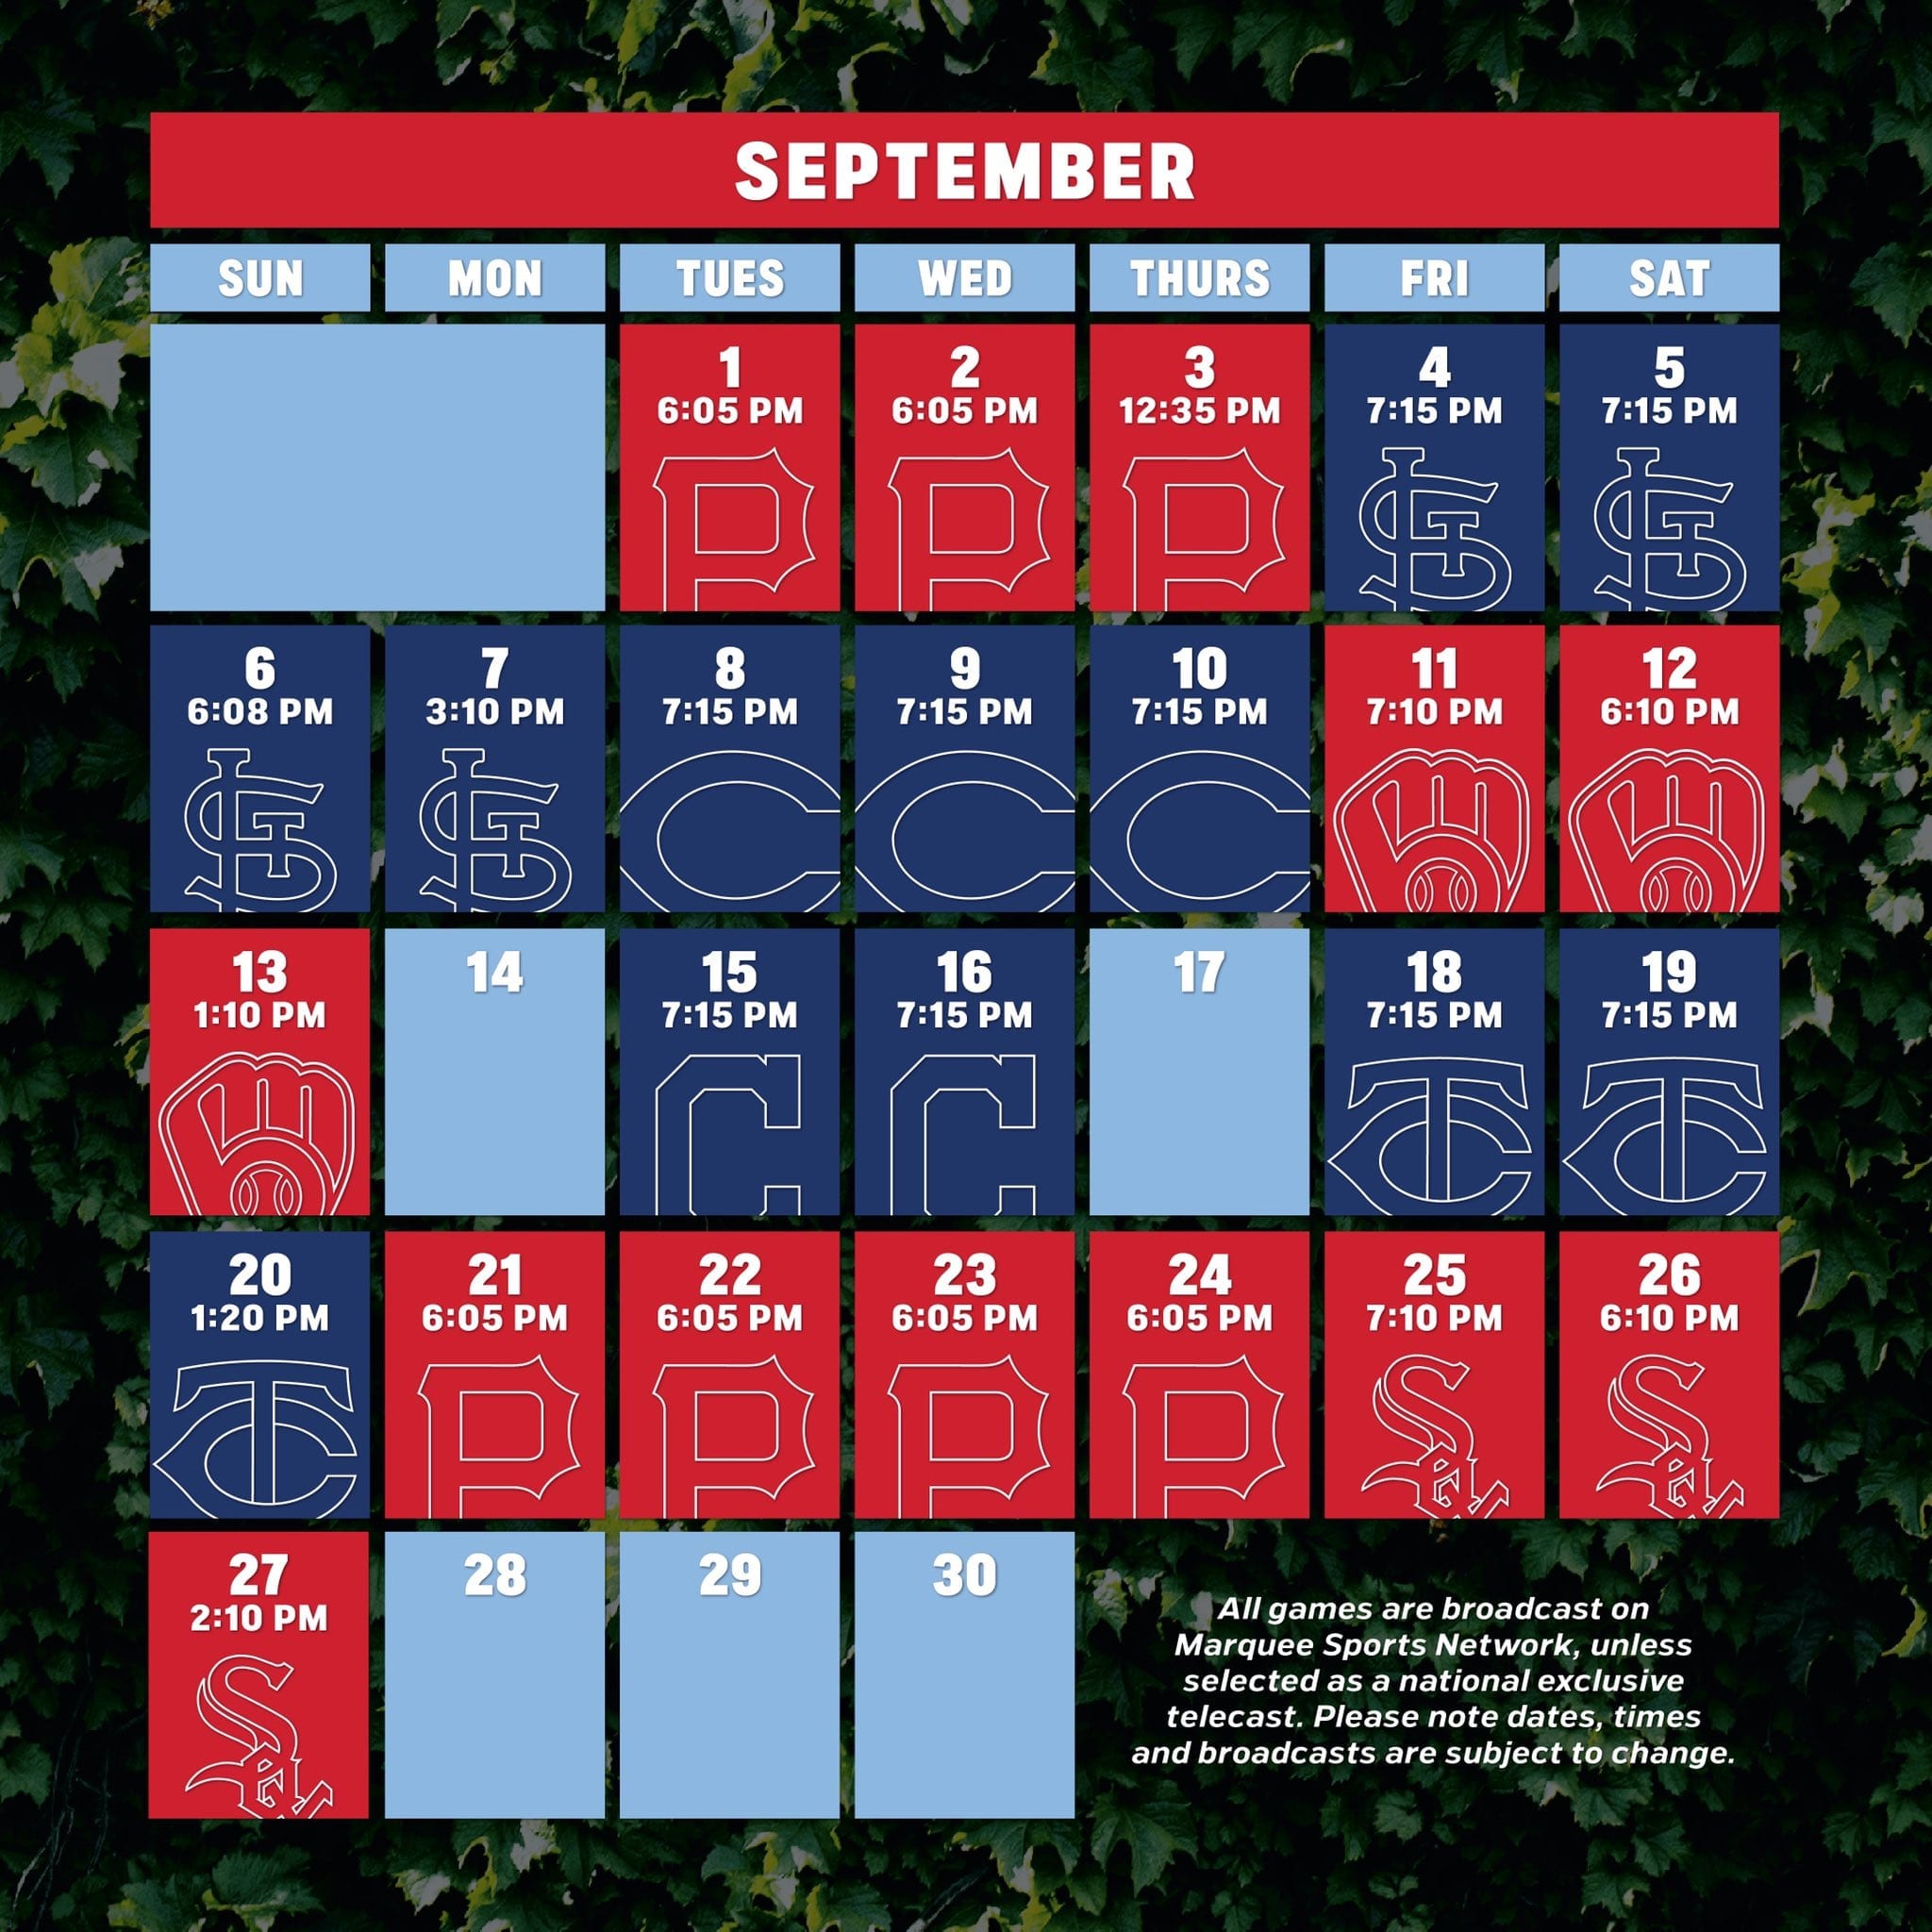 Analyzing the 2020 Cubs schedule